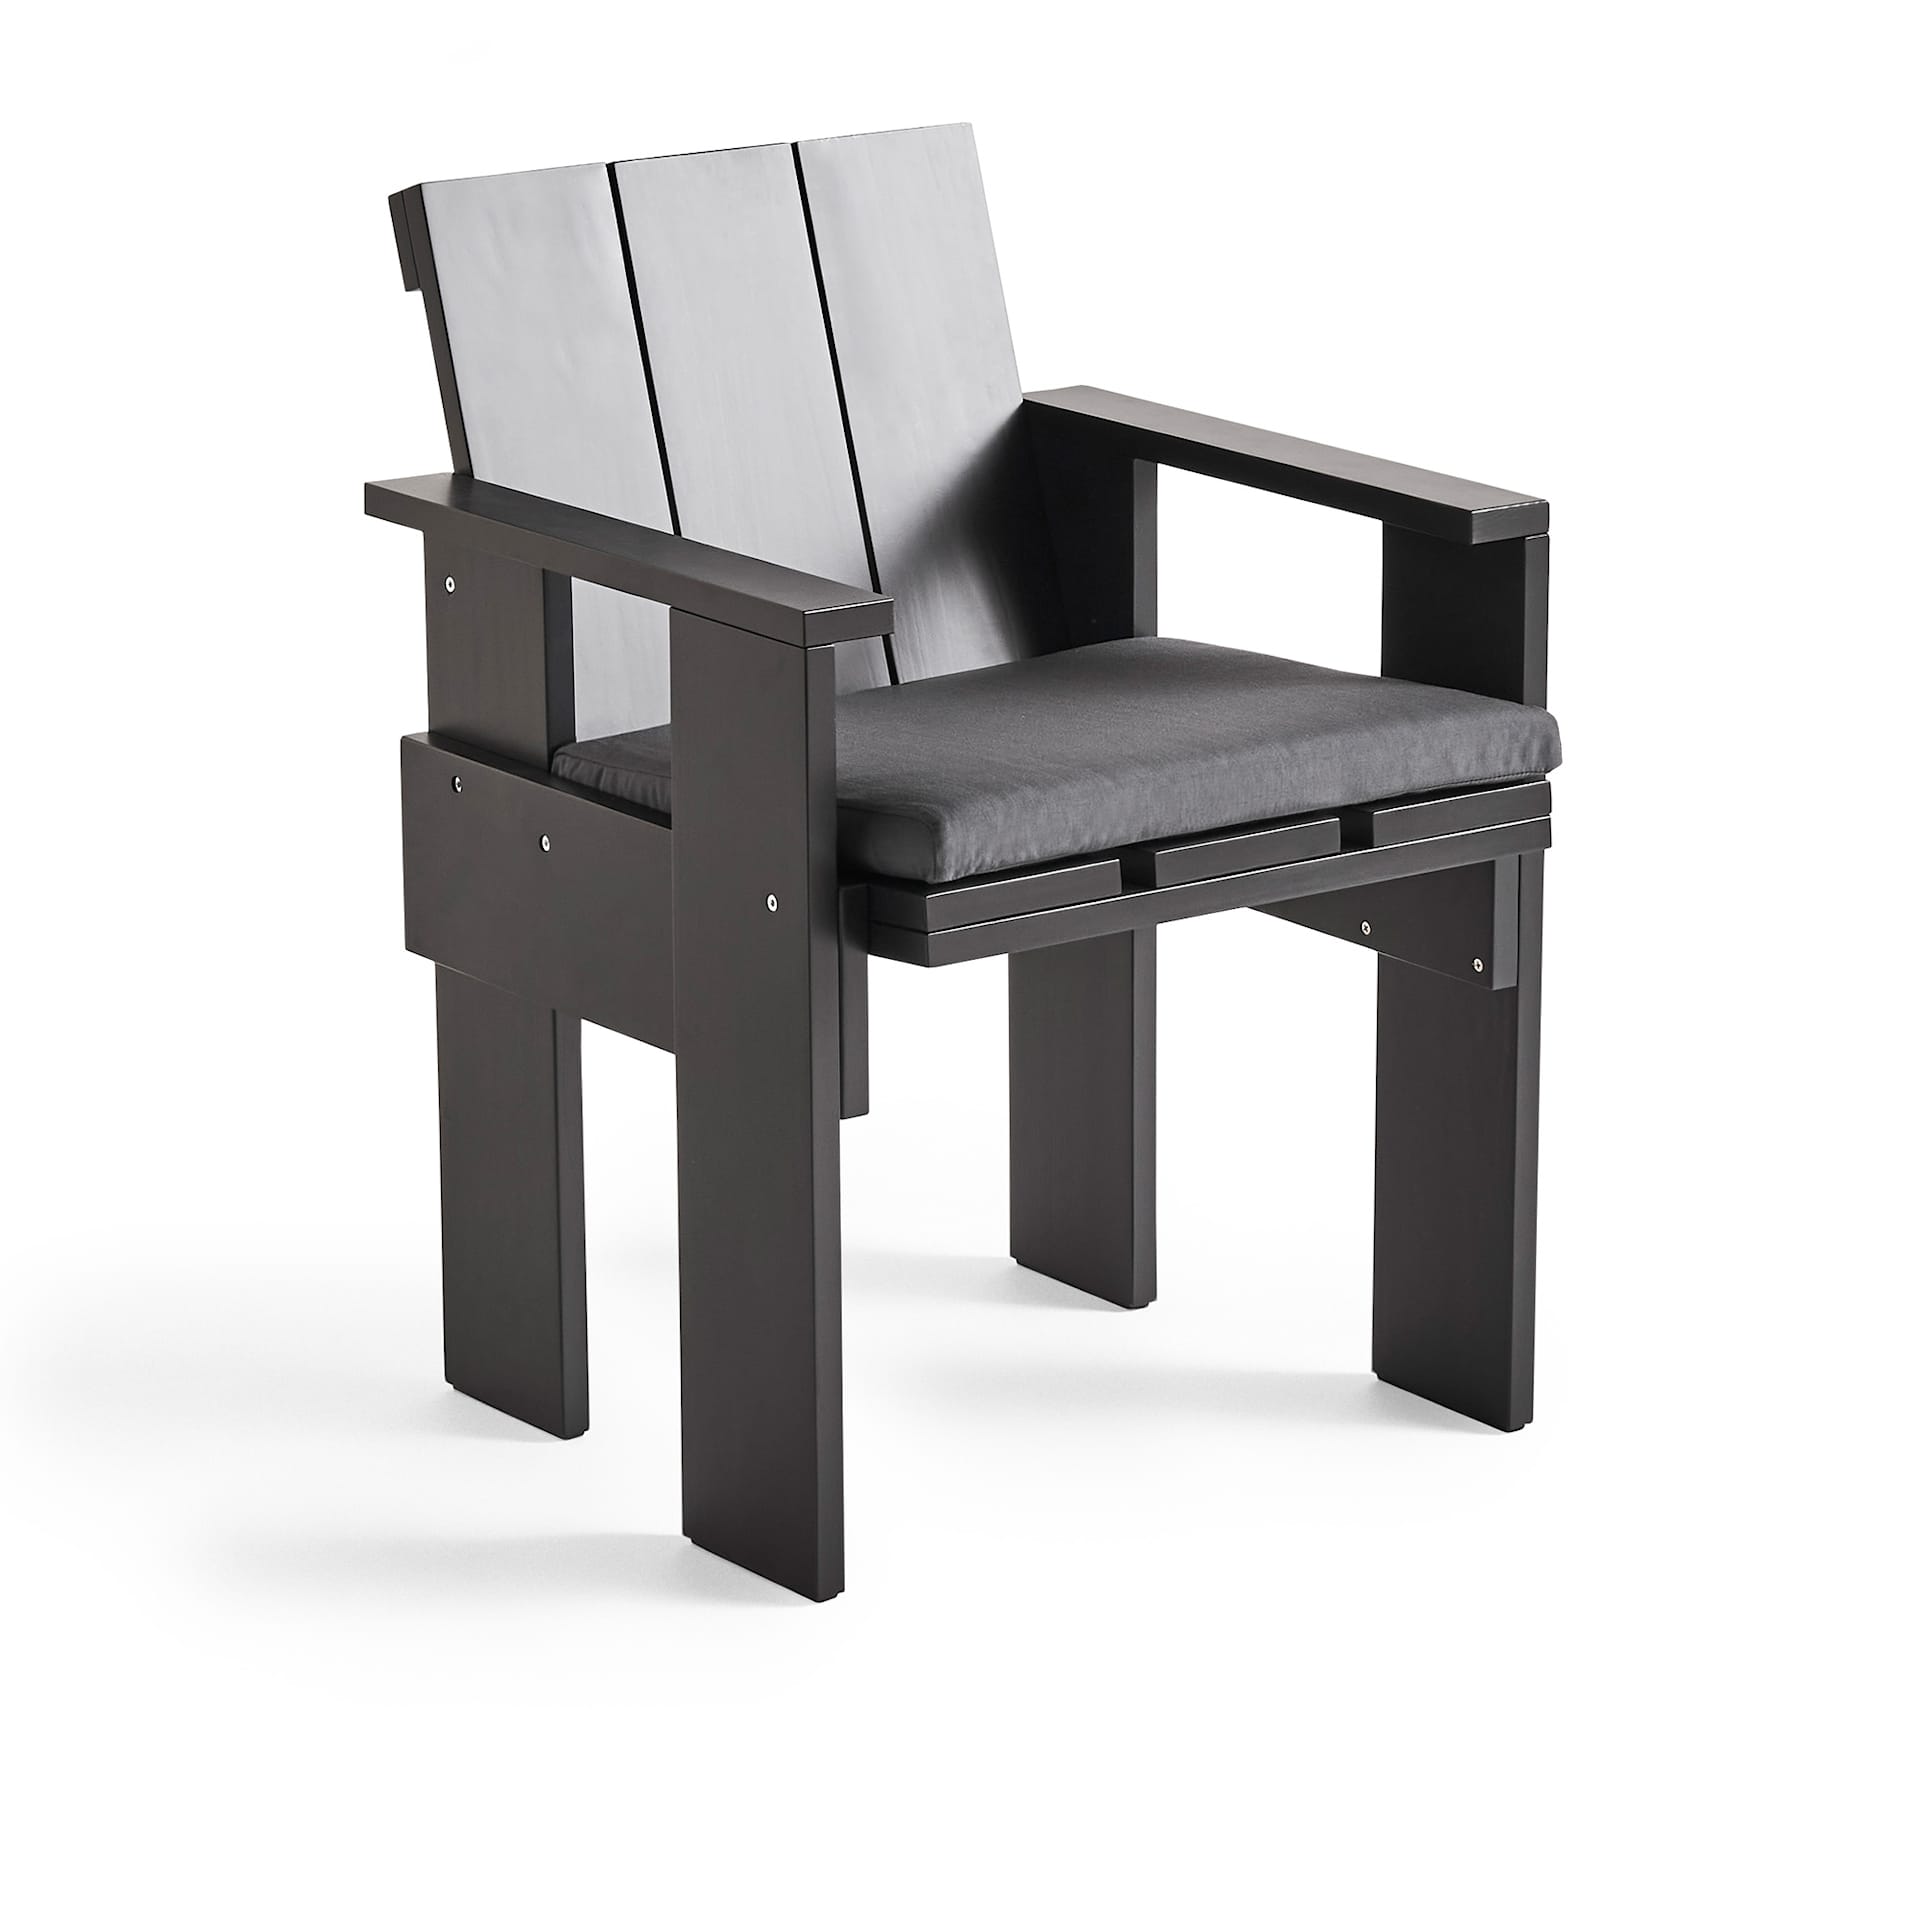 Seat Cushion for Crate Dining Chair - HAY - Gerrit Rietveld - NO GA